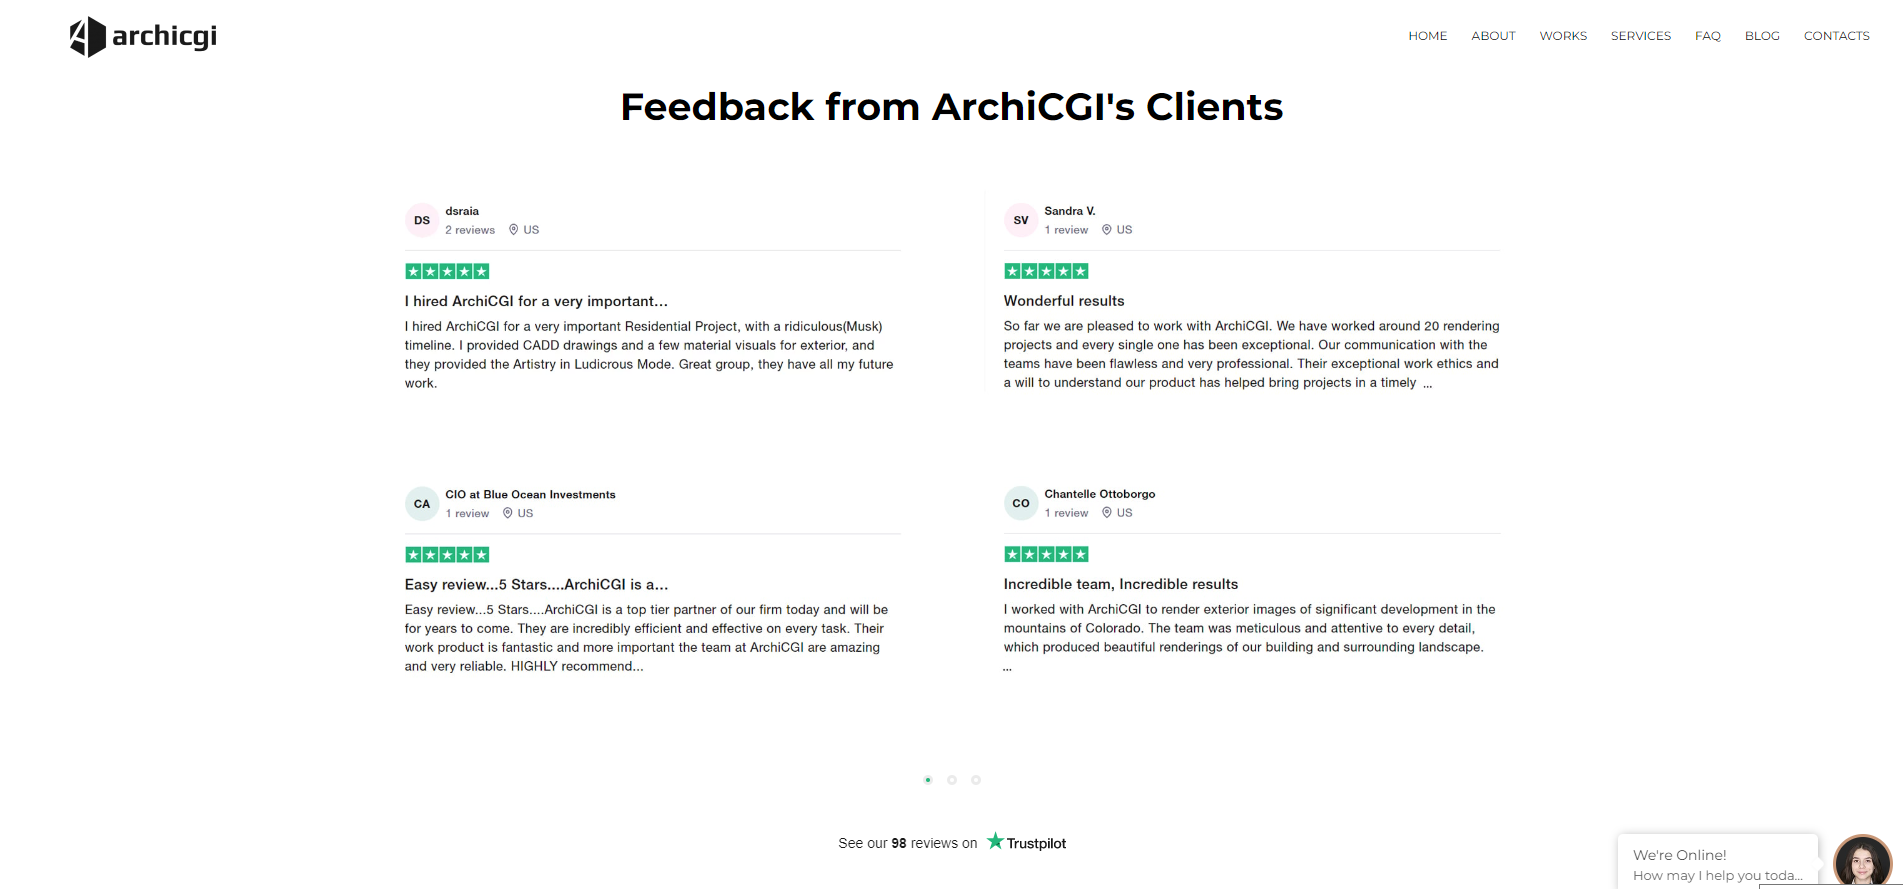 Marketing an Architecture Firm: Example of Feedback